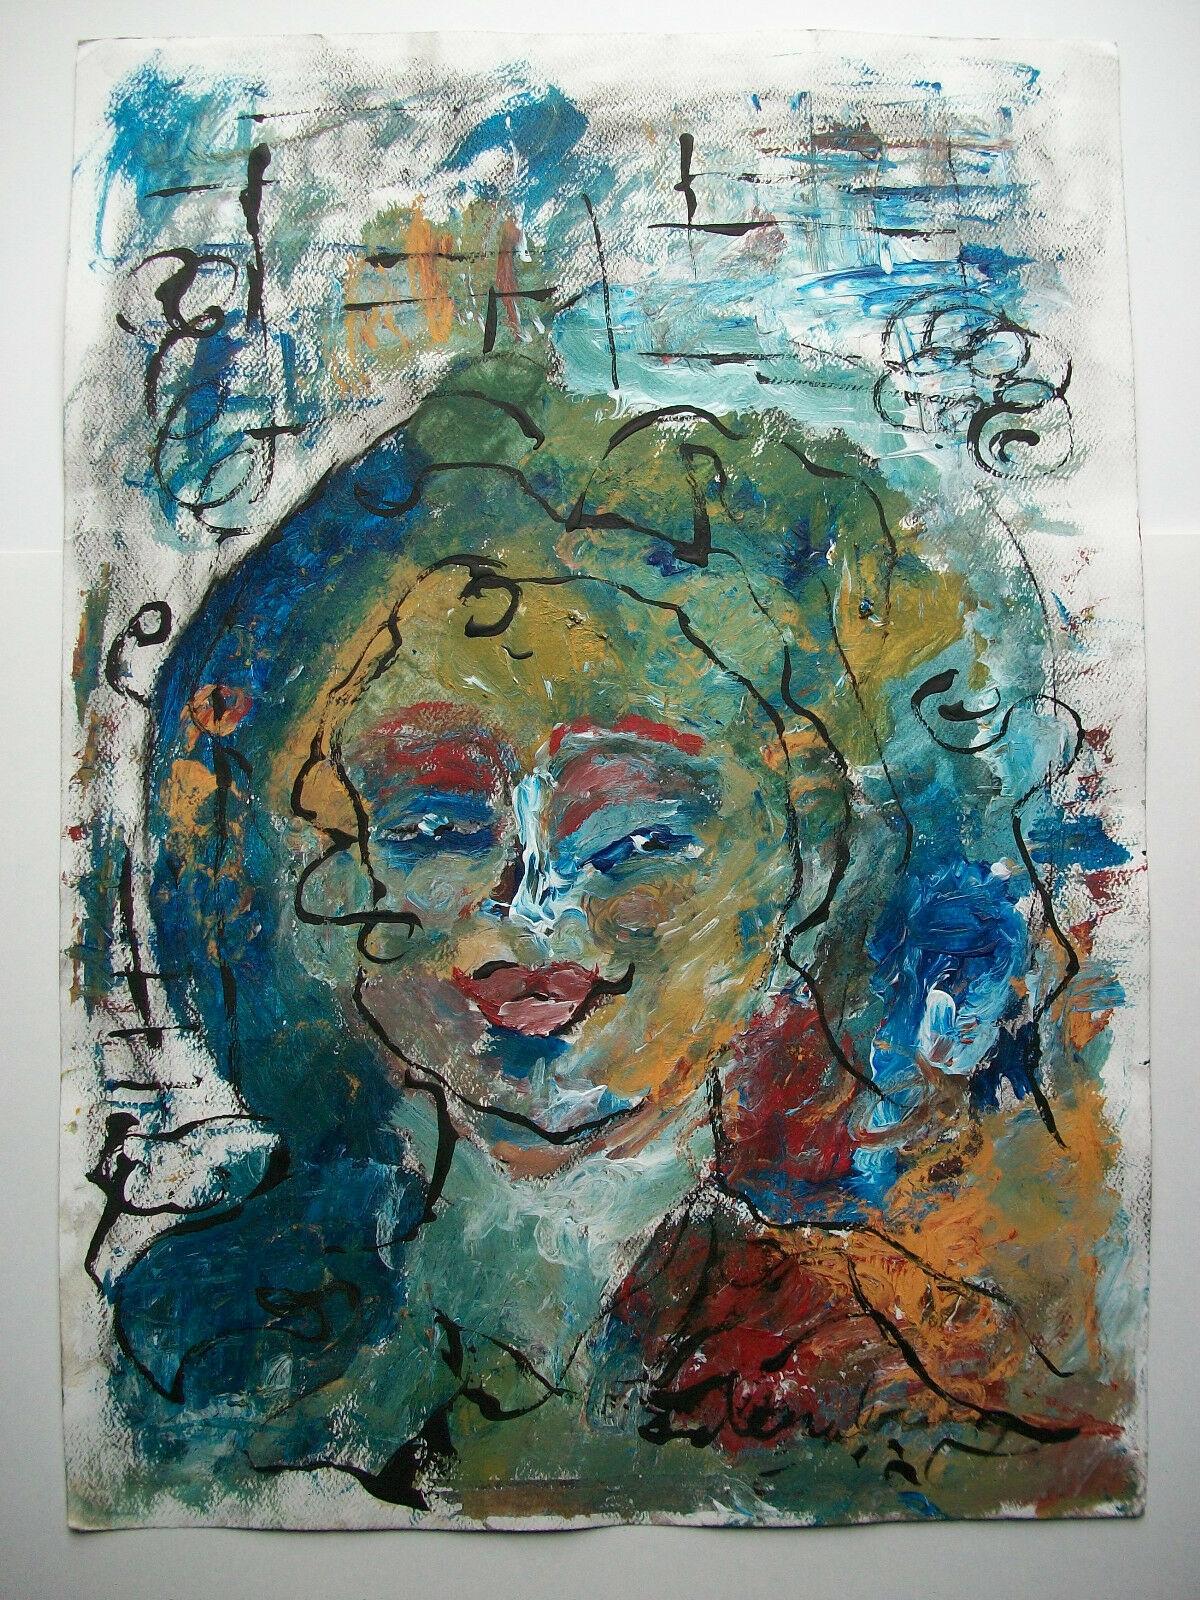 Sheila Denaburg, Contemporary Mixed Media Painting, Signed, Canada, C. 2011 For Sale 3